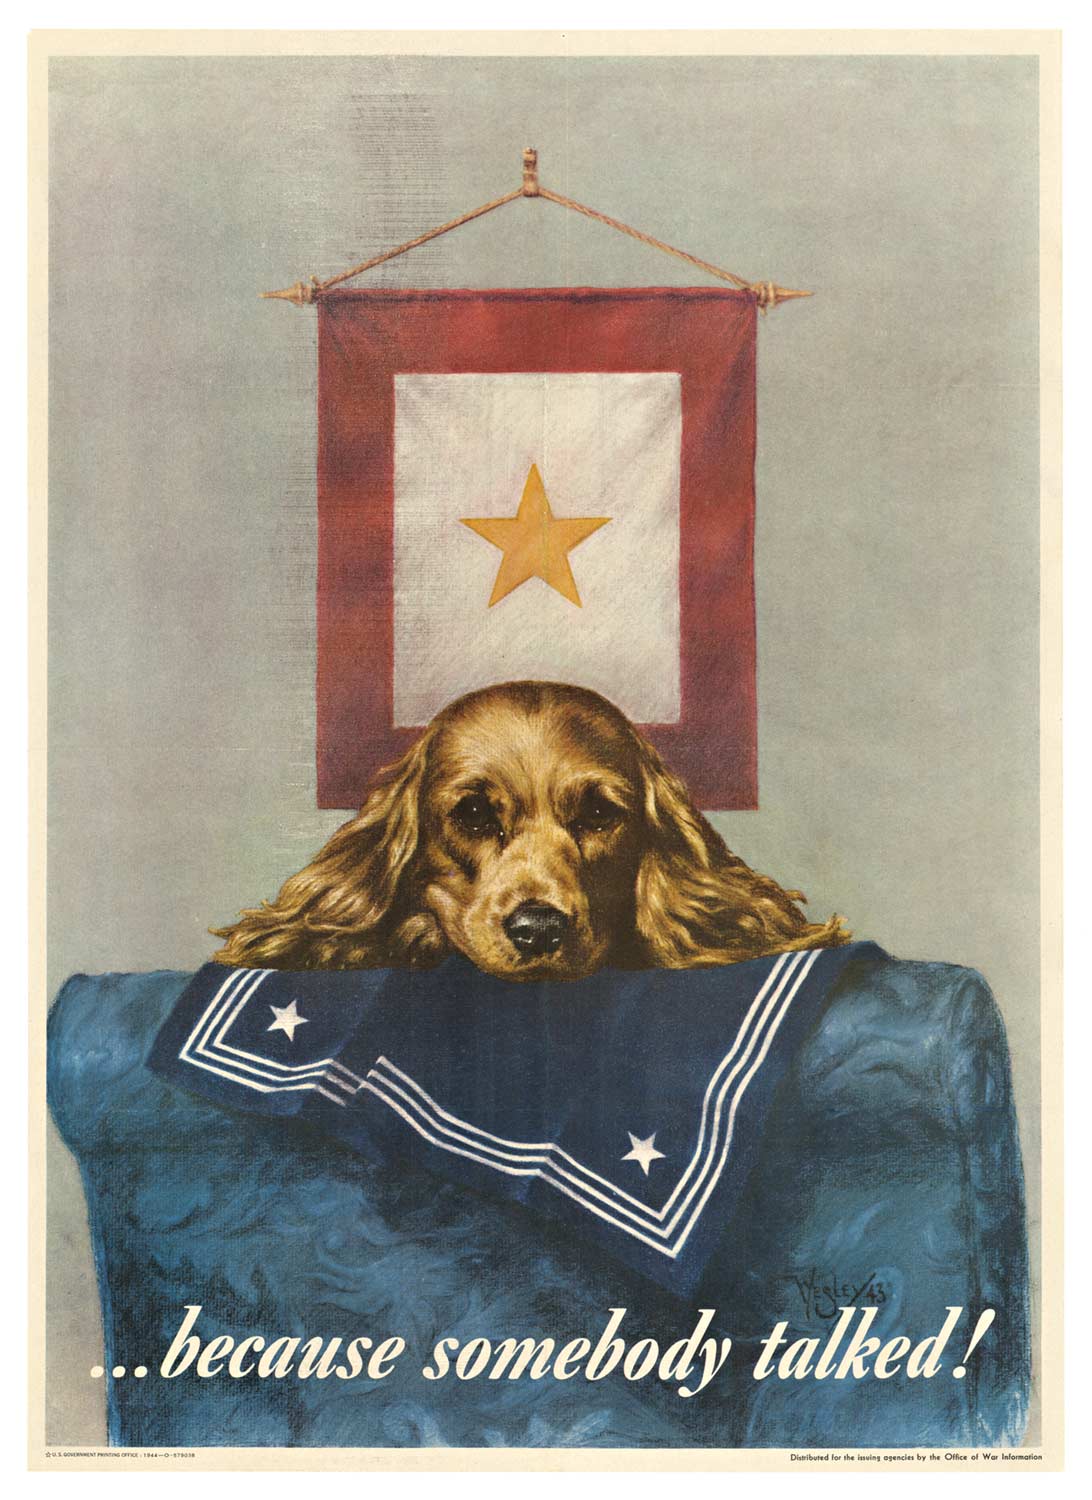 dog with its head on a sailors uniform, someone talked WWII original poster, linen backed.